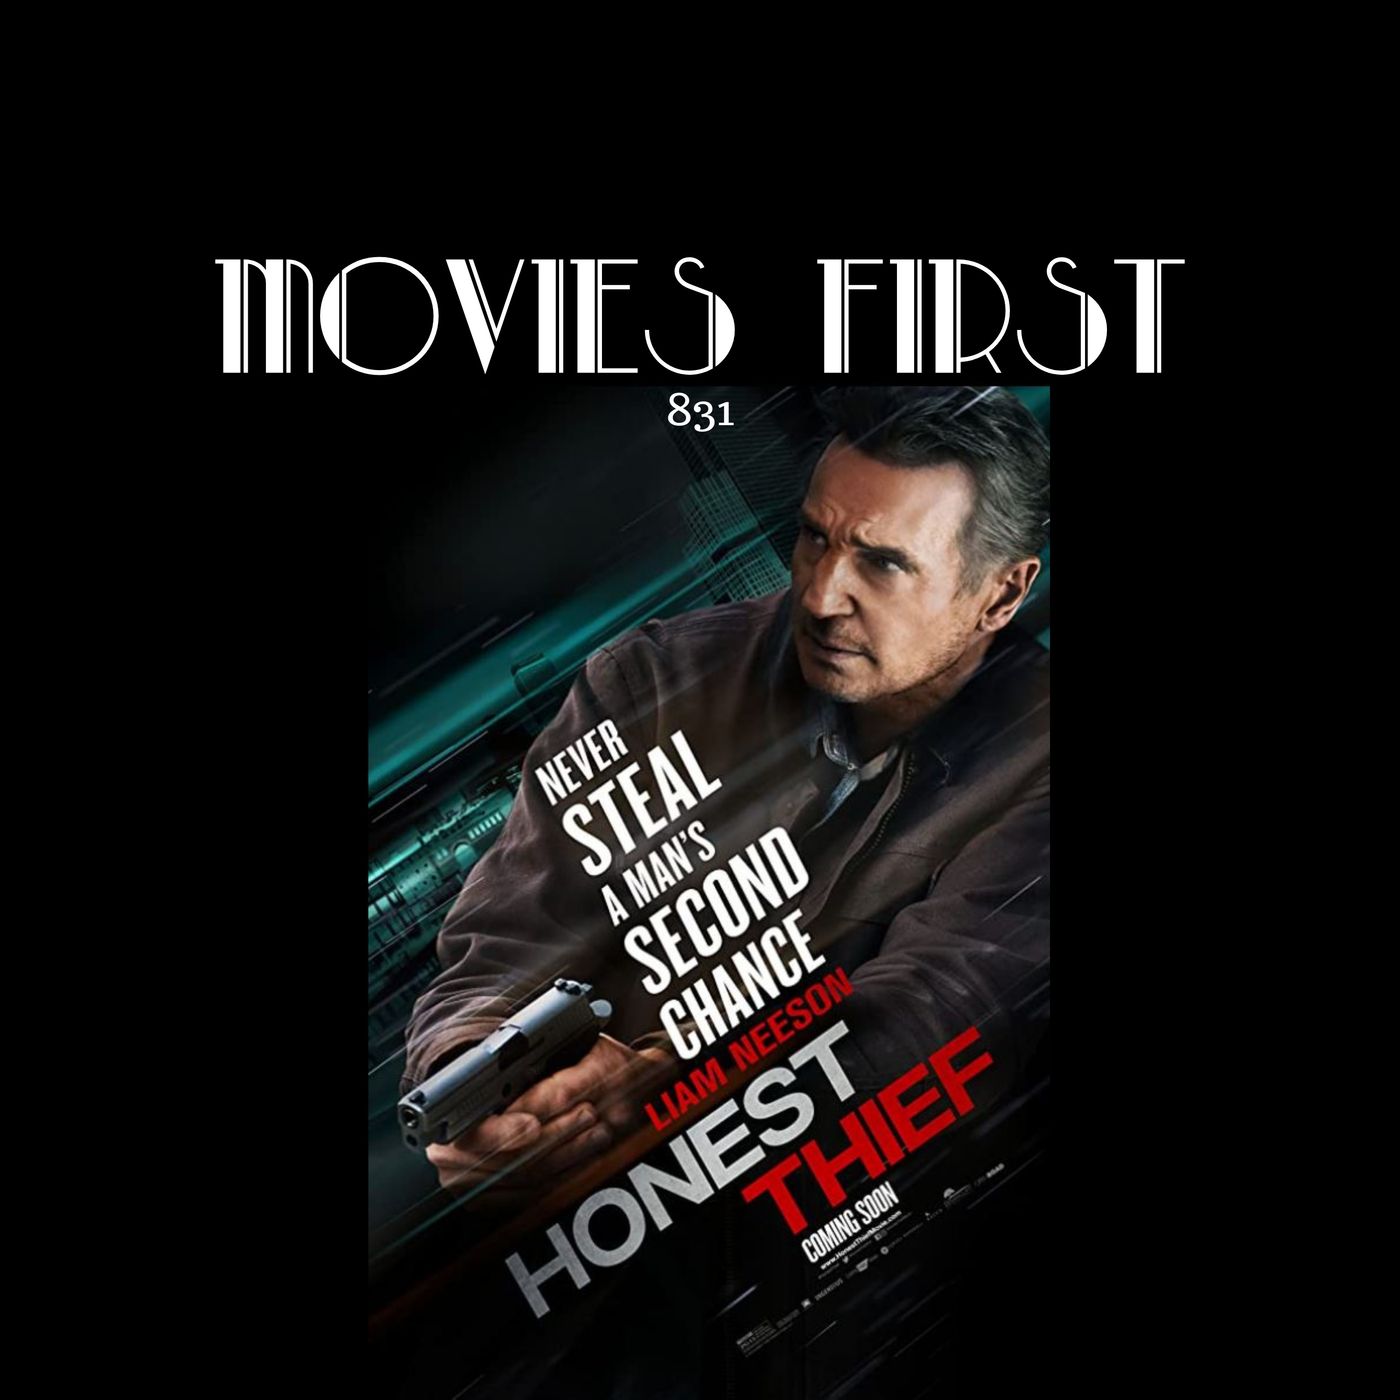 Honest Thief (Action, Crime, Drama) (the @MoviesFirst review)